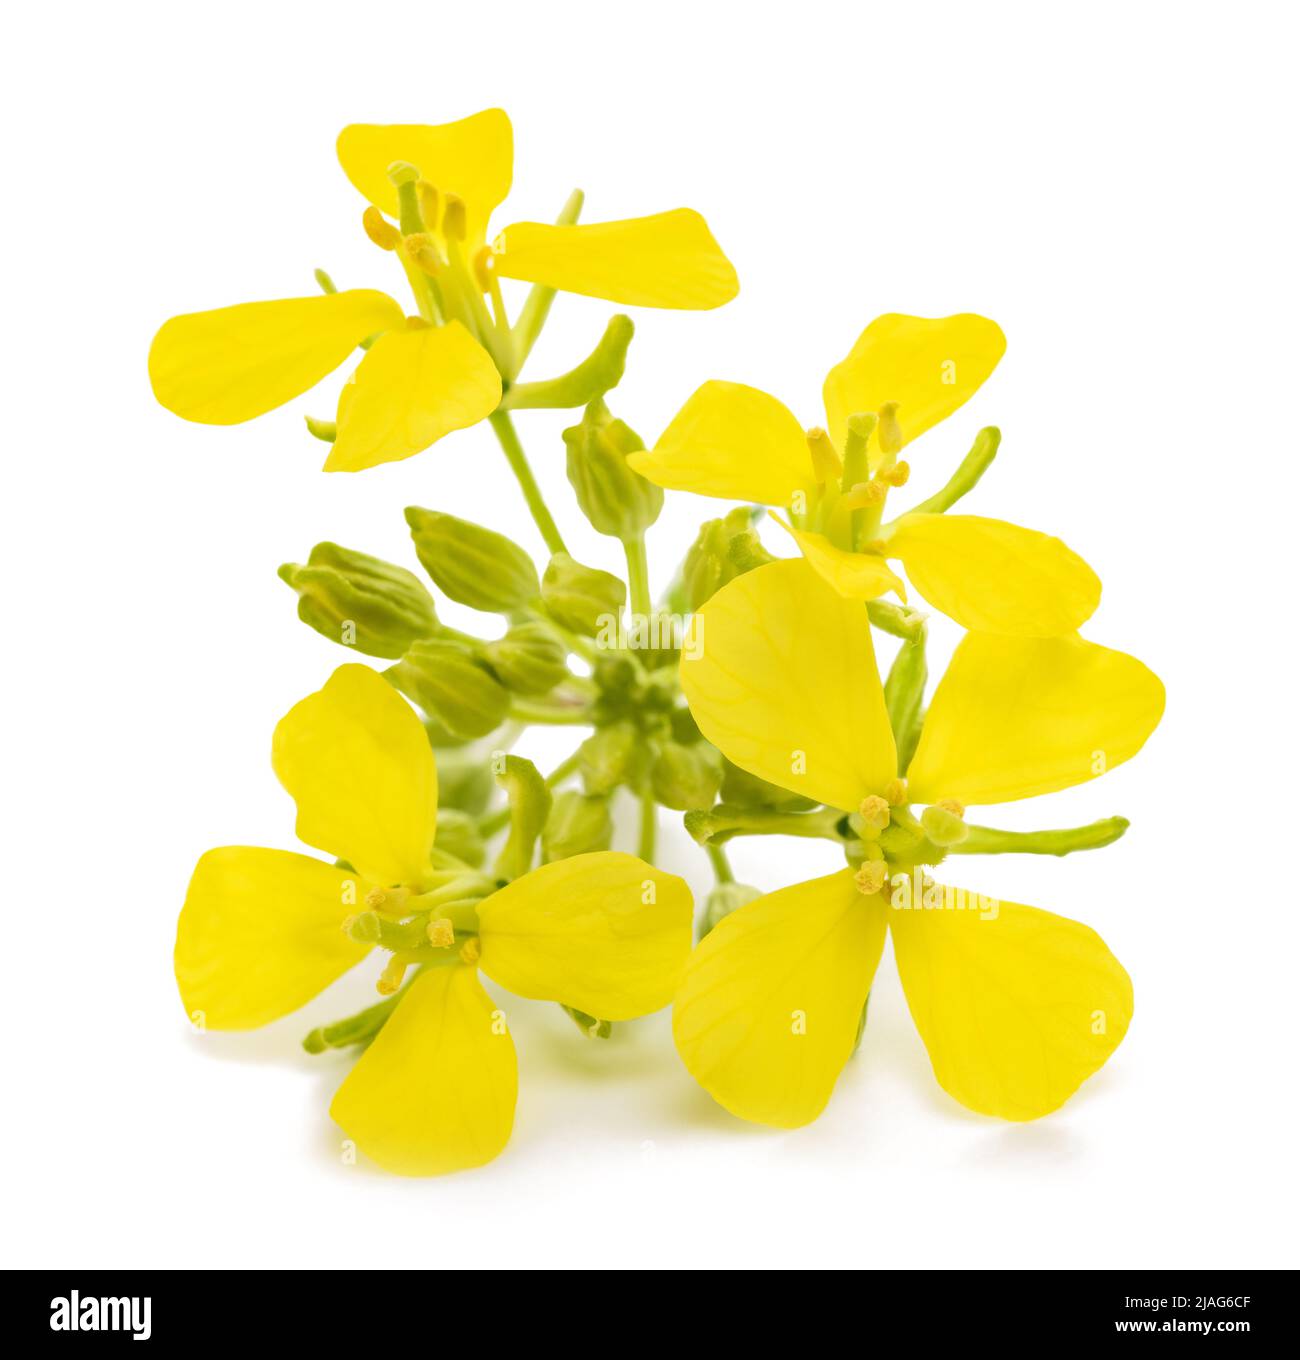 Mustard plant with flowers isolated on white background Stock Photo